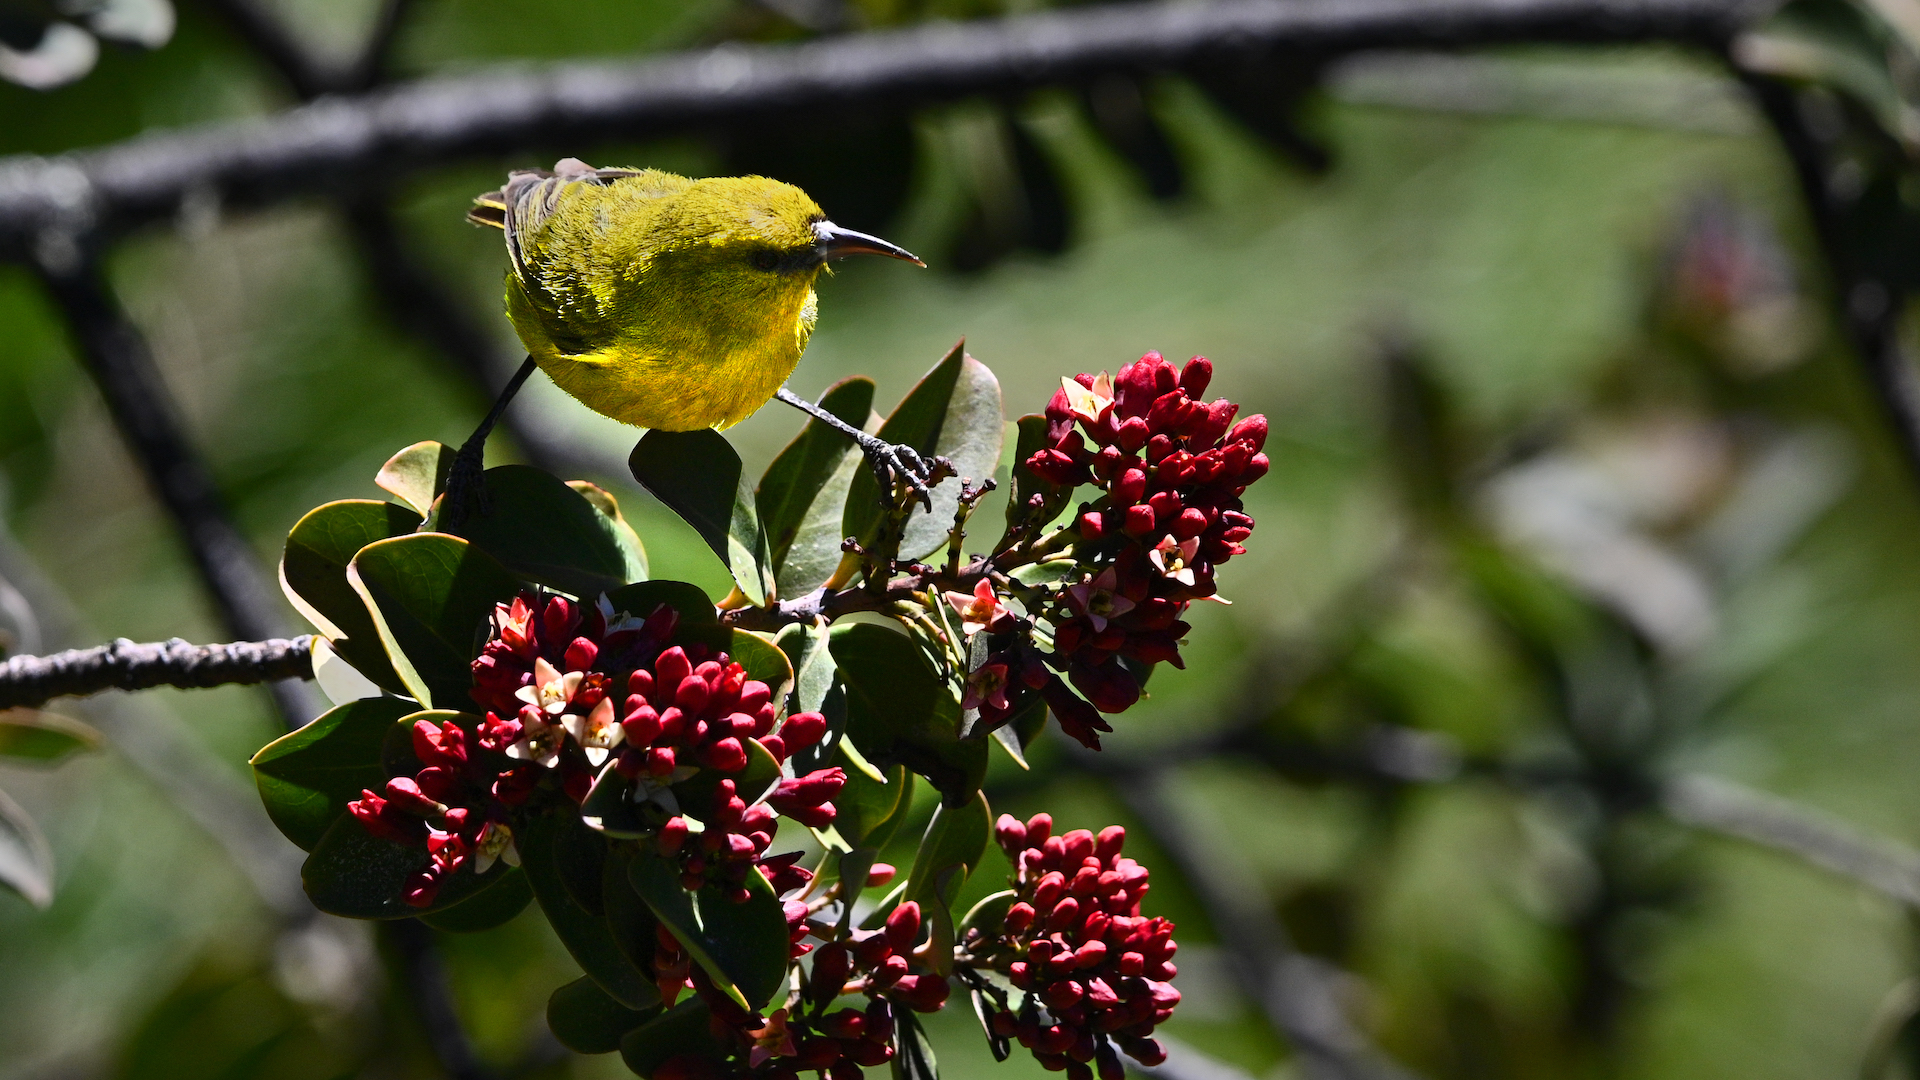 Mosquito ‘birth control’ could save Hawaii’s iconic honeycreepers